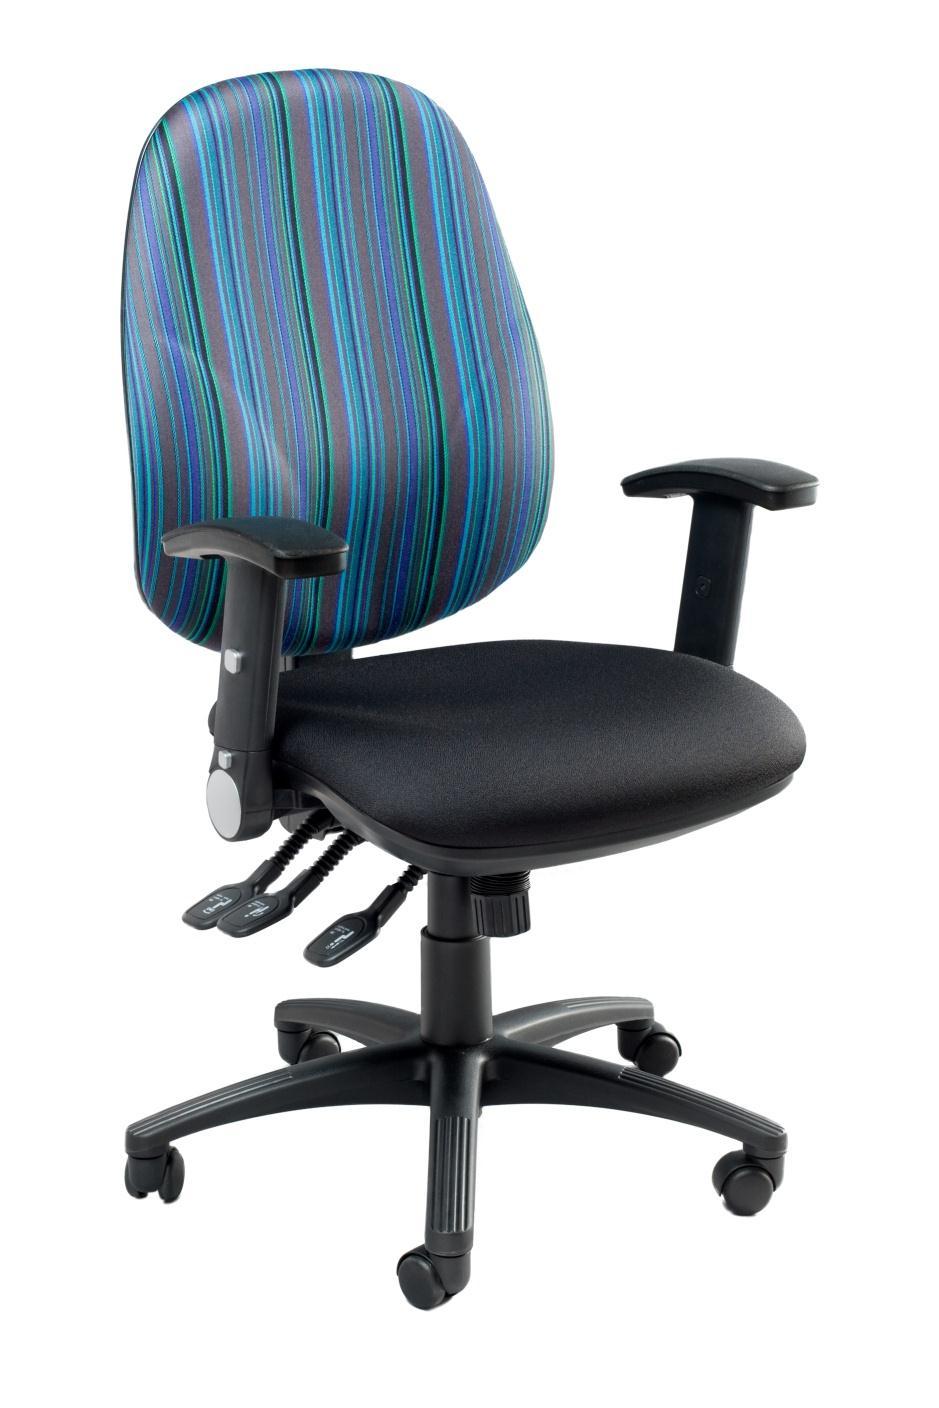 Conway C01 High contoured back task chair Features: - 3-lever heavy duty asynchronous mechanism. Bodyweight tension control. Seat height adjustment.